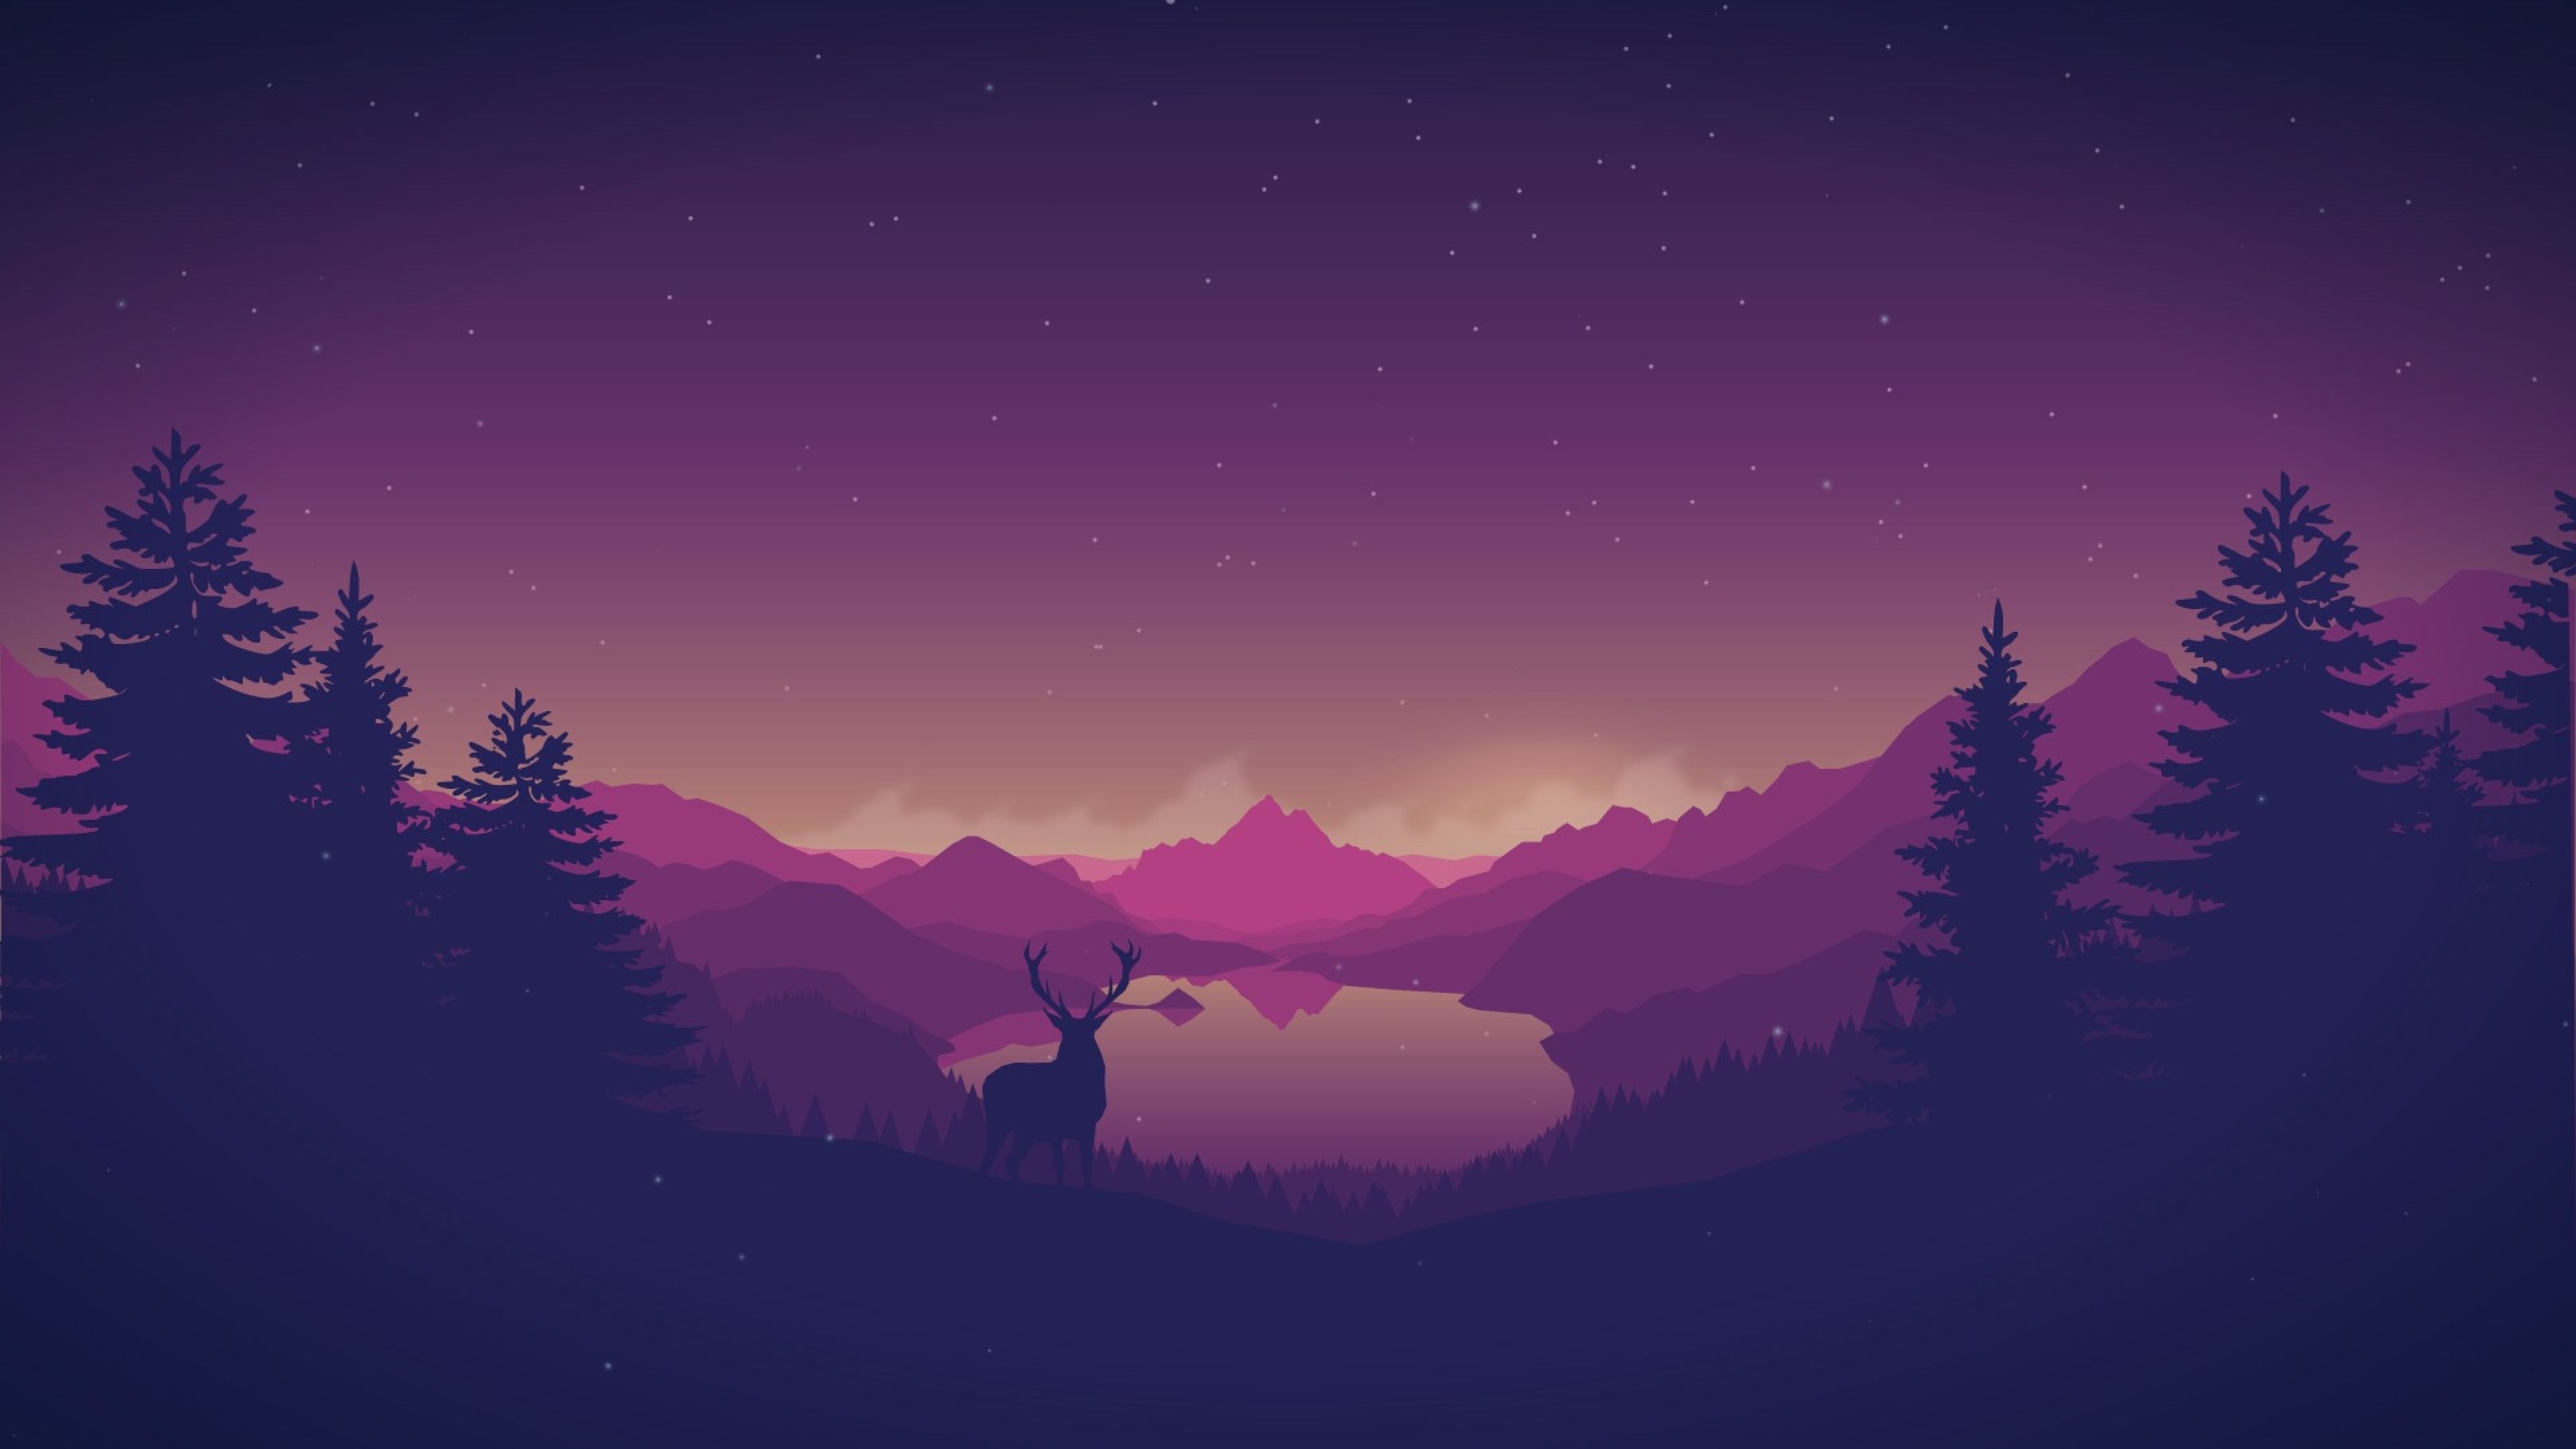 Artistic Forest Mountains Lake And Deer 4K Wallpaper, HD Artist 4K Wallpaper, Image, Photo and Background